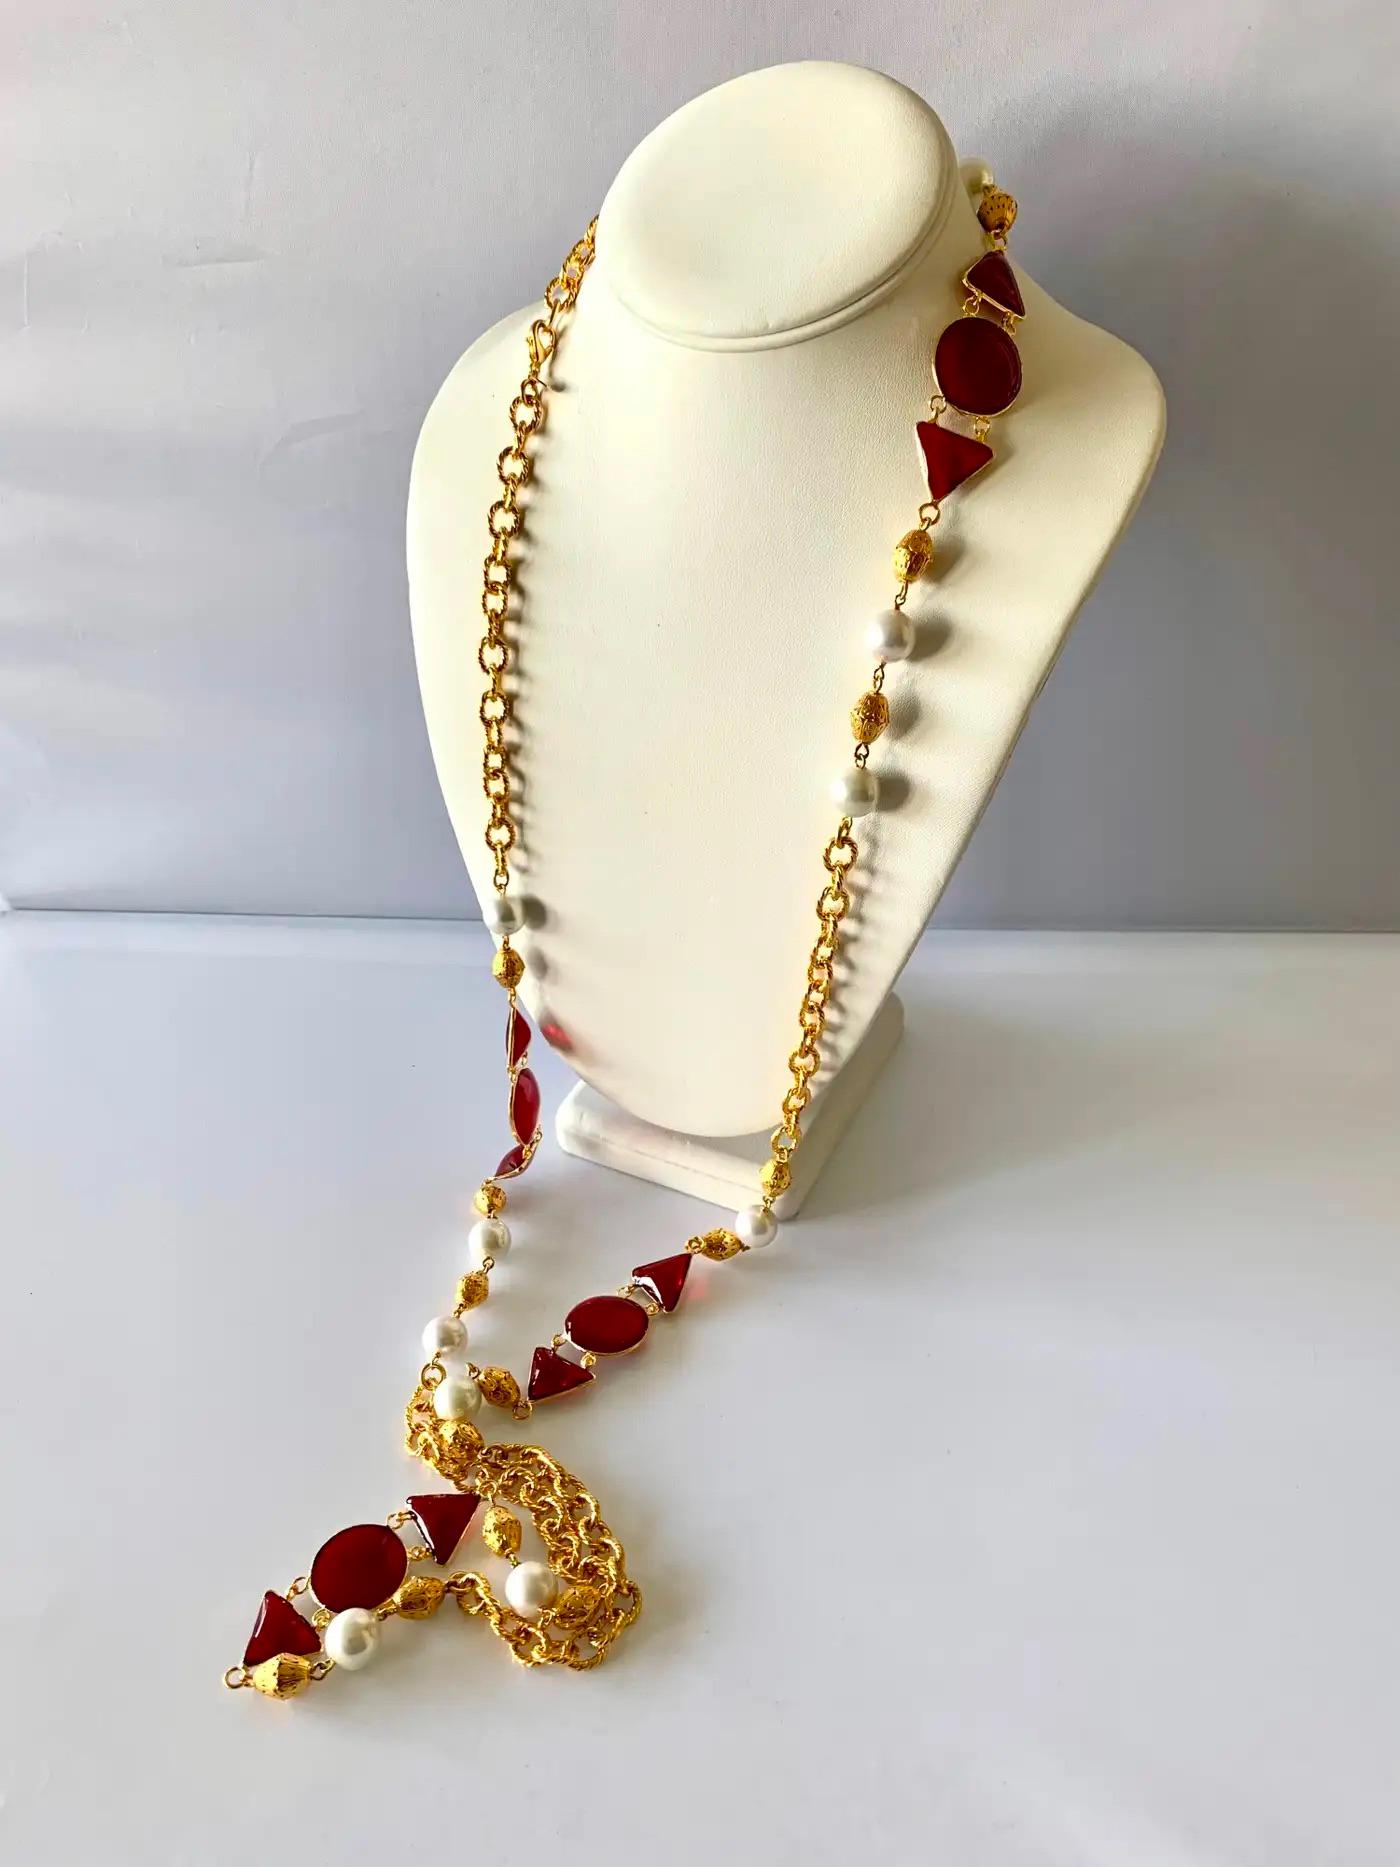 French sautoir comprised of an ornate gilt metal chain accented by white faux pearls and red geometric gripoix and pate de verre elements. The necklace can be doubled.

Length: 51 inches